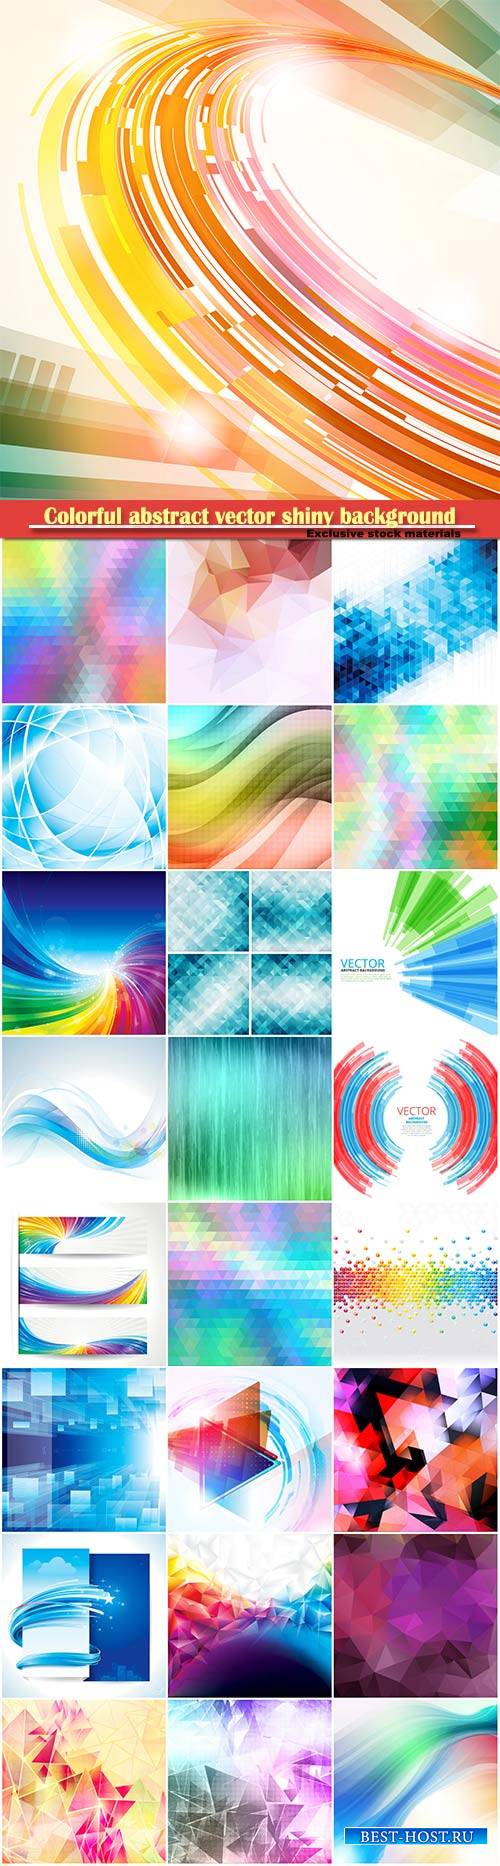 Colorful abstract vector shiny background